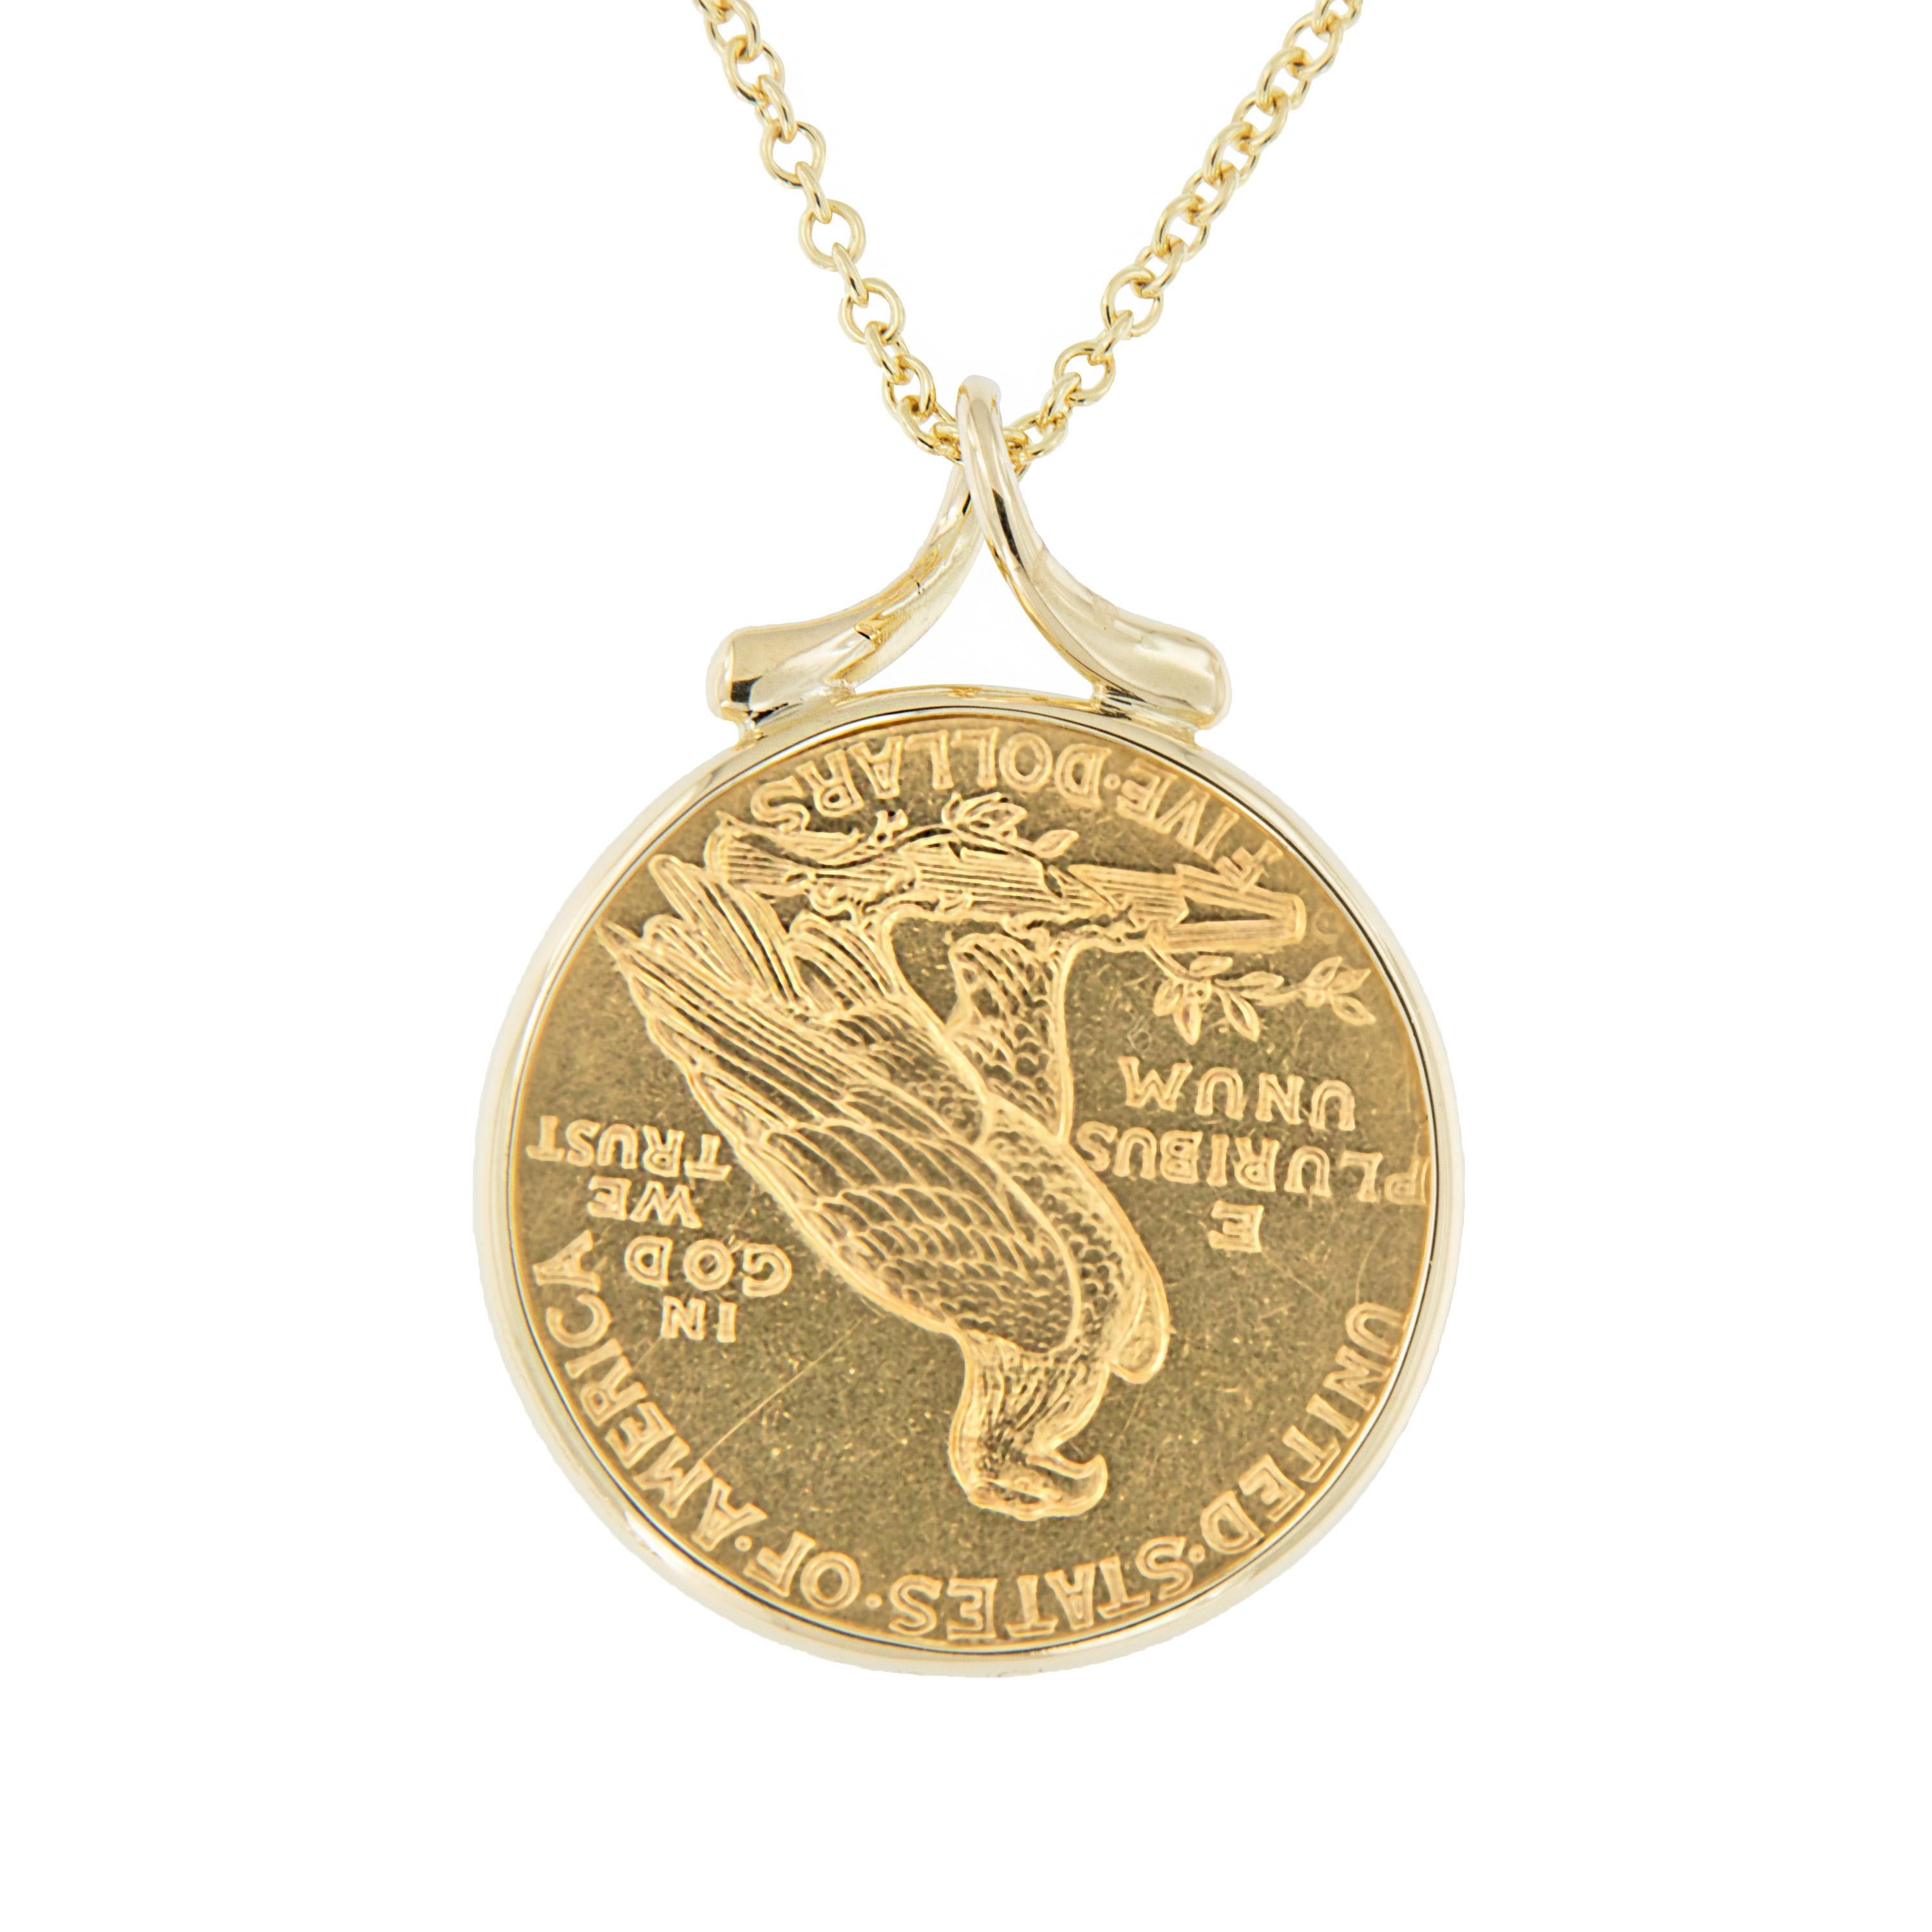 Enjoy a piece of American gold coin history! This 1909 $5.00  Indian head half eagle coin is framed in 18k yellow gold and suspends from a ribbon-style bail on a 16-inch chain. Pendant measures 29mm x 22.5mm. Weighs 12.9 grams.